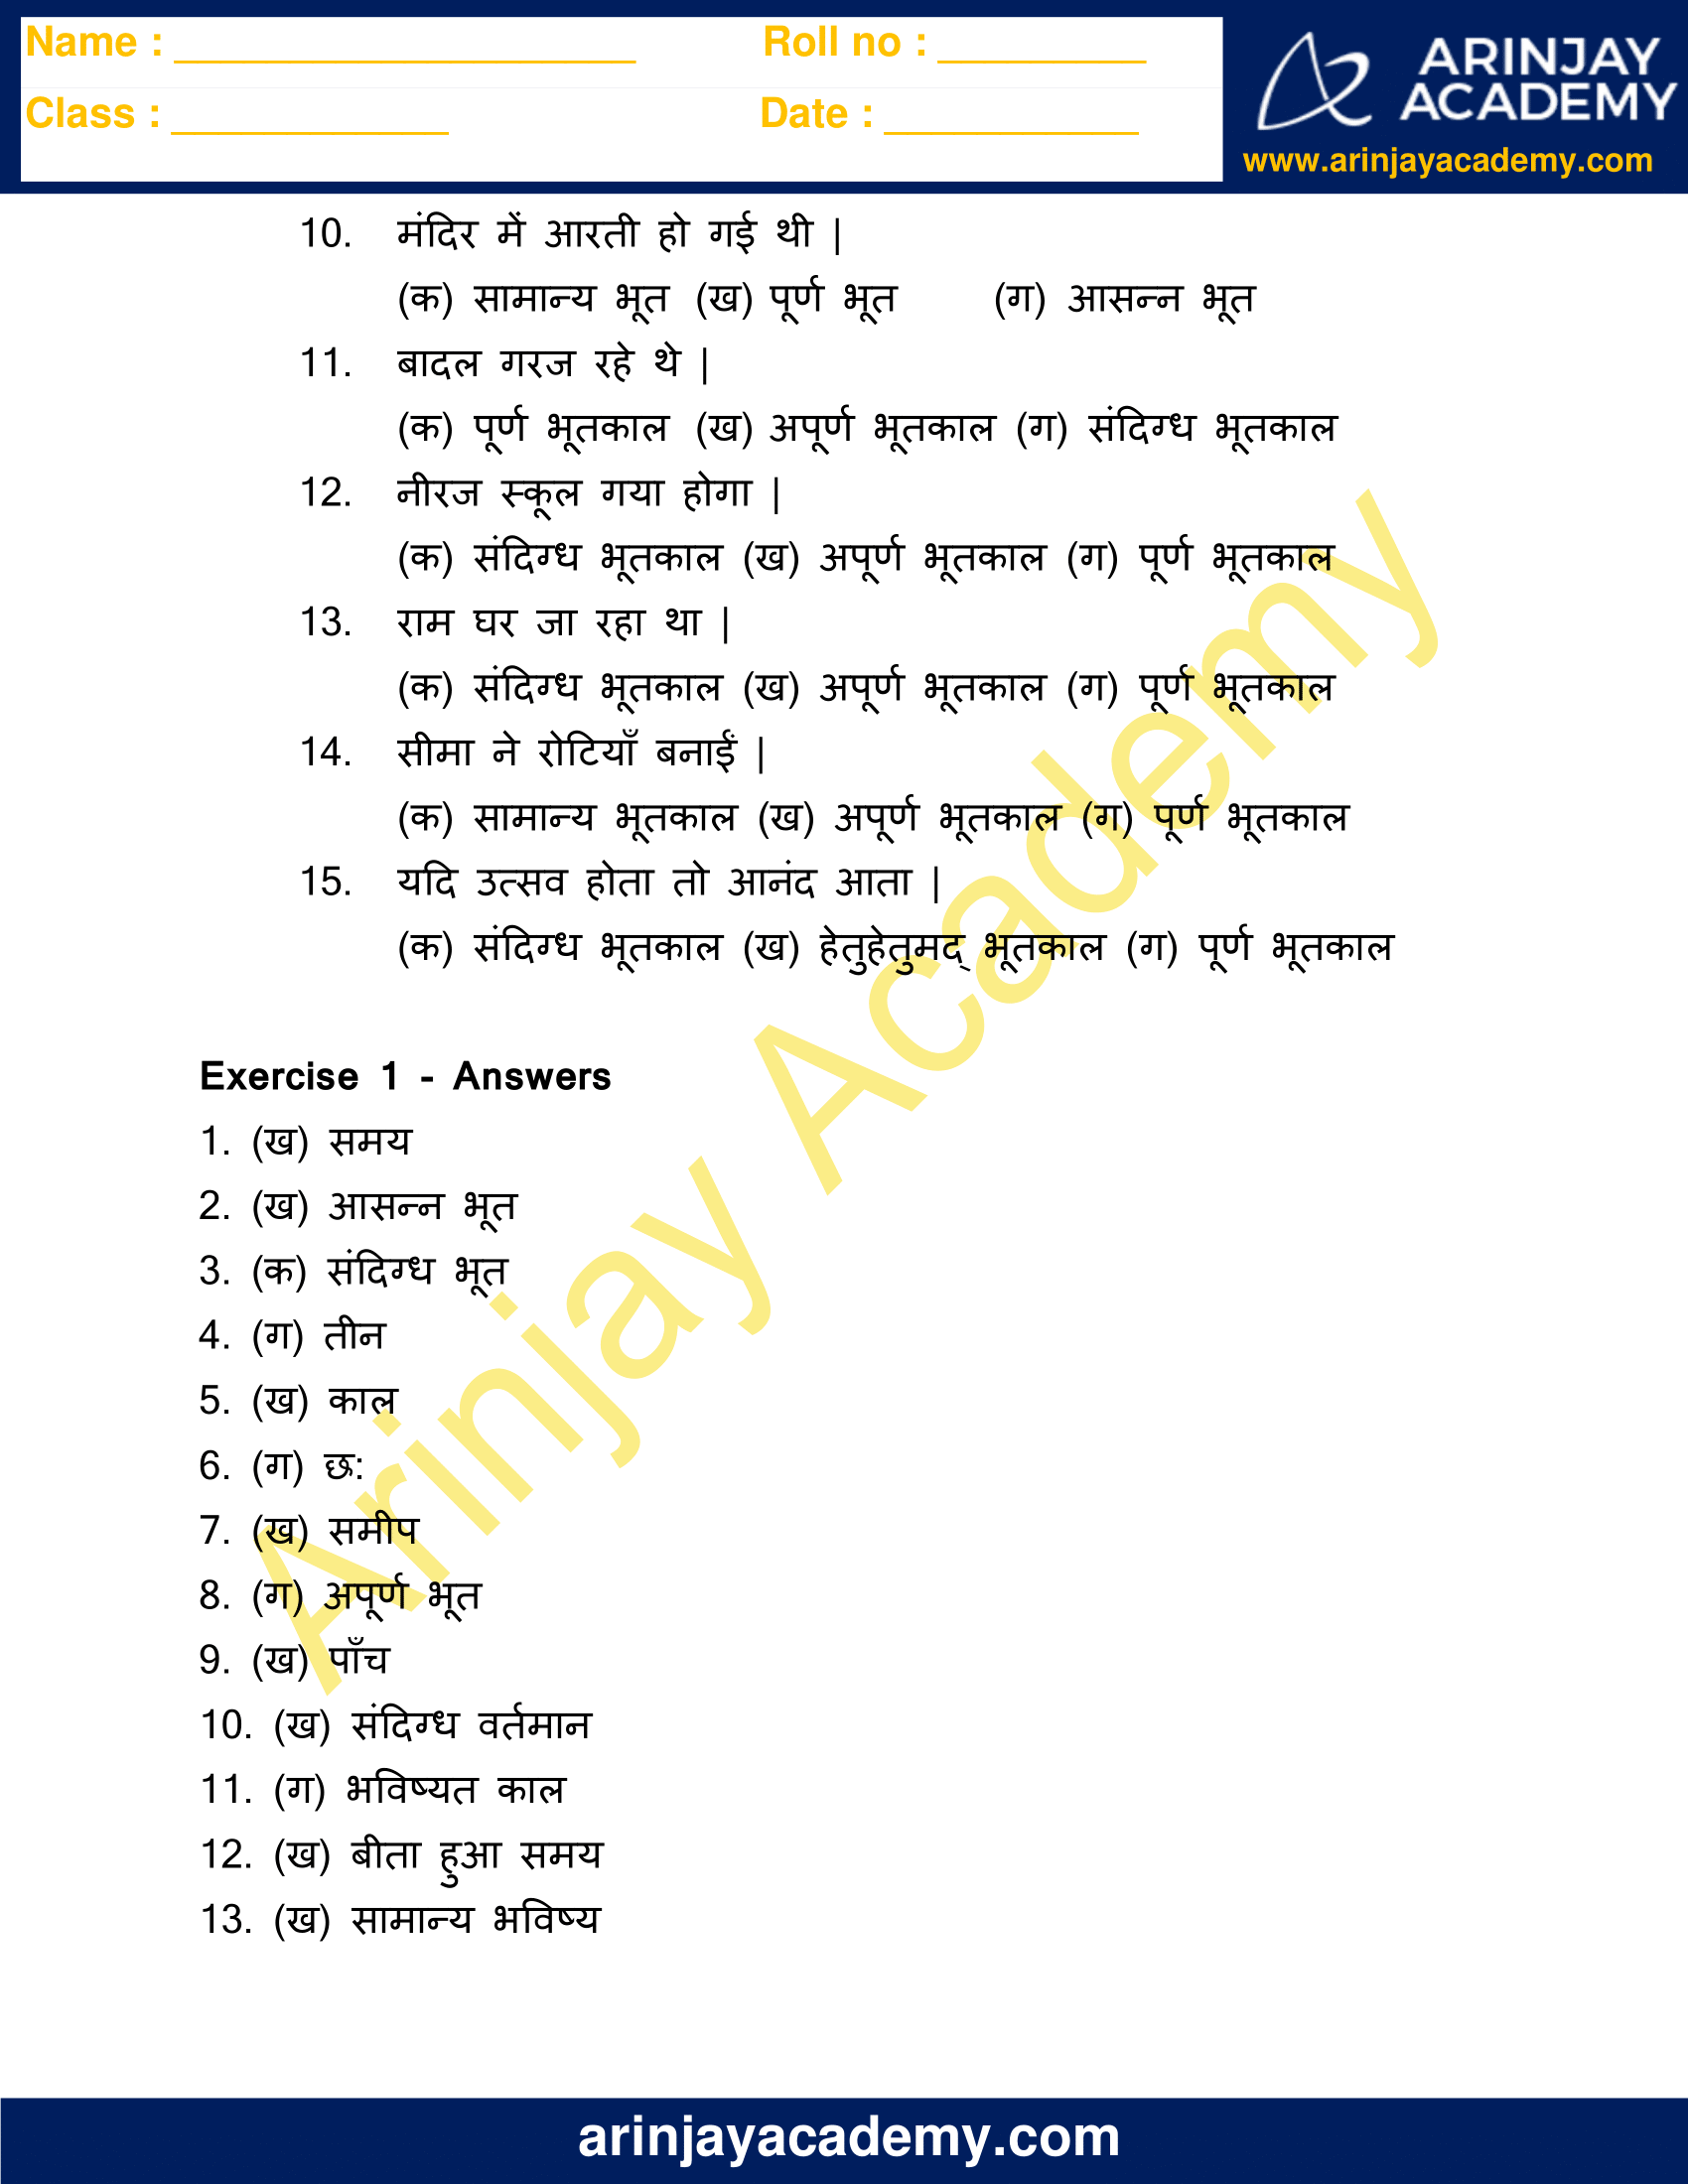 Kaal Worksheet in Hindi for Class 10 image 4